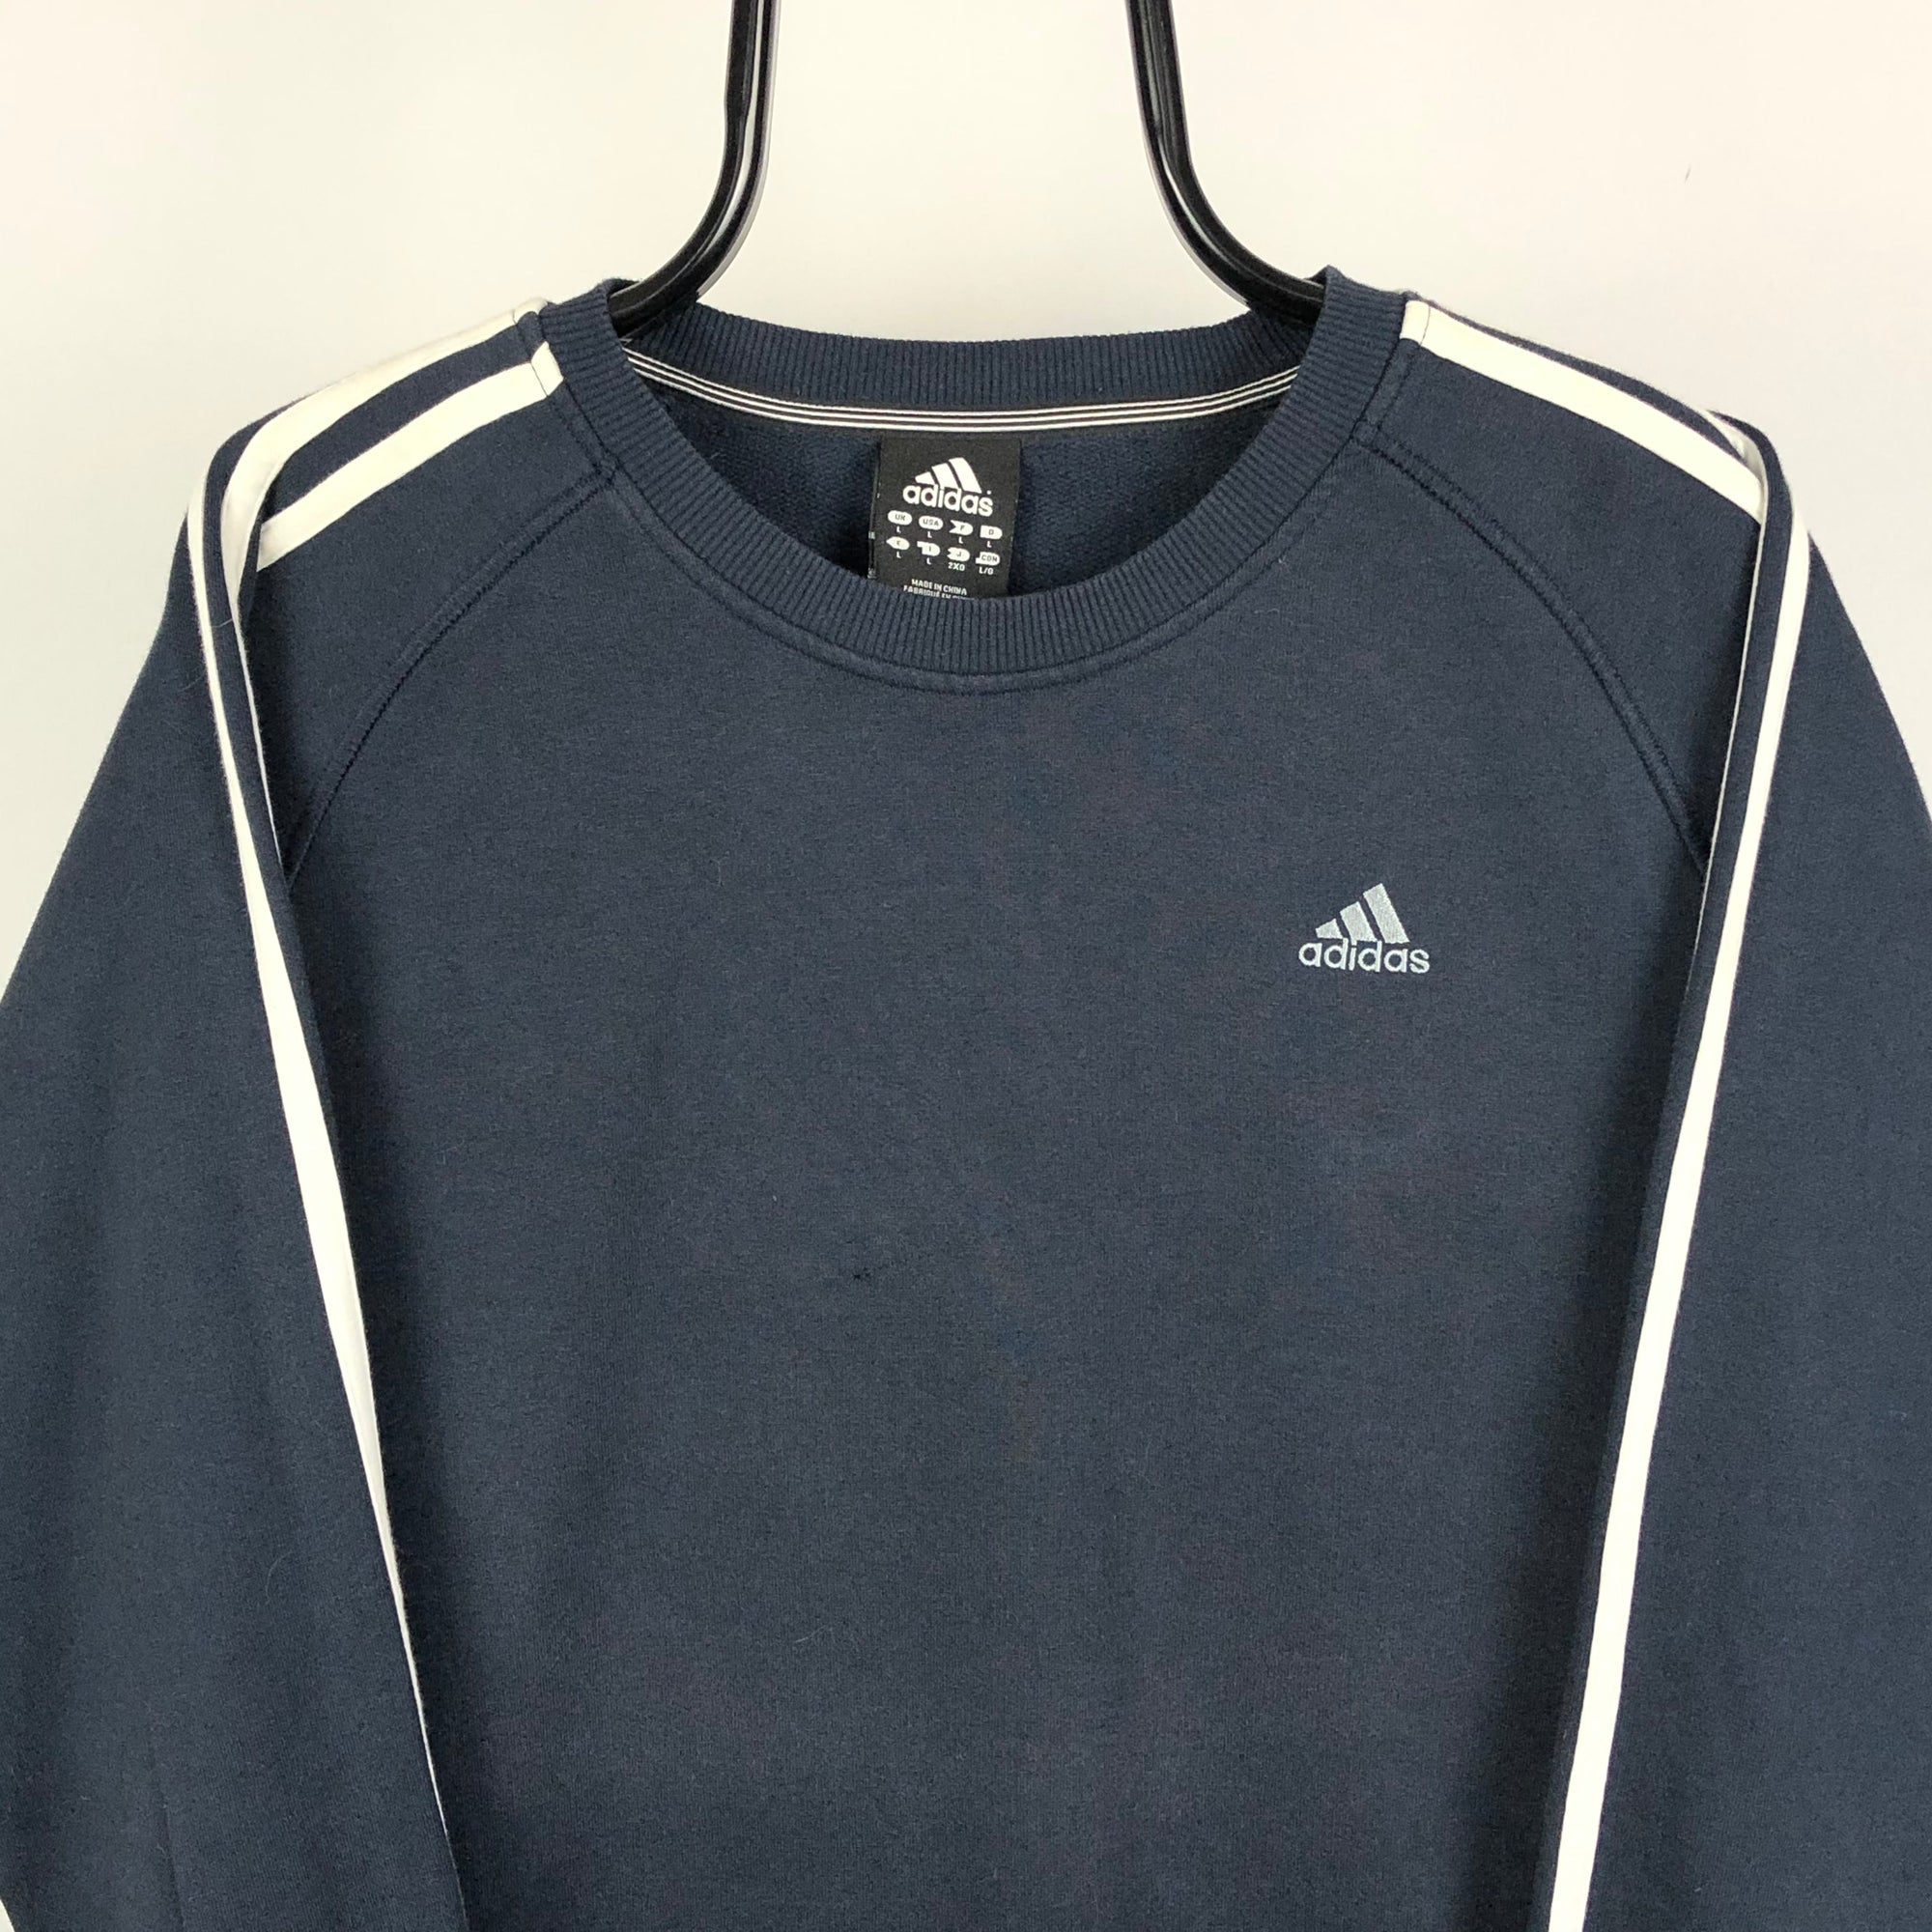 Adidas Embroidered Small Logo Sweatshirt in Navy/White - Men's Large/Women's XL